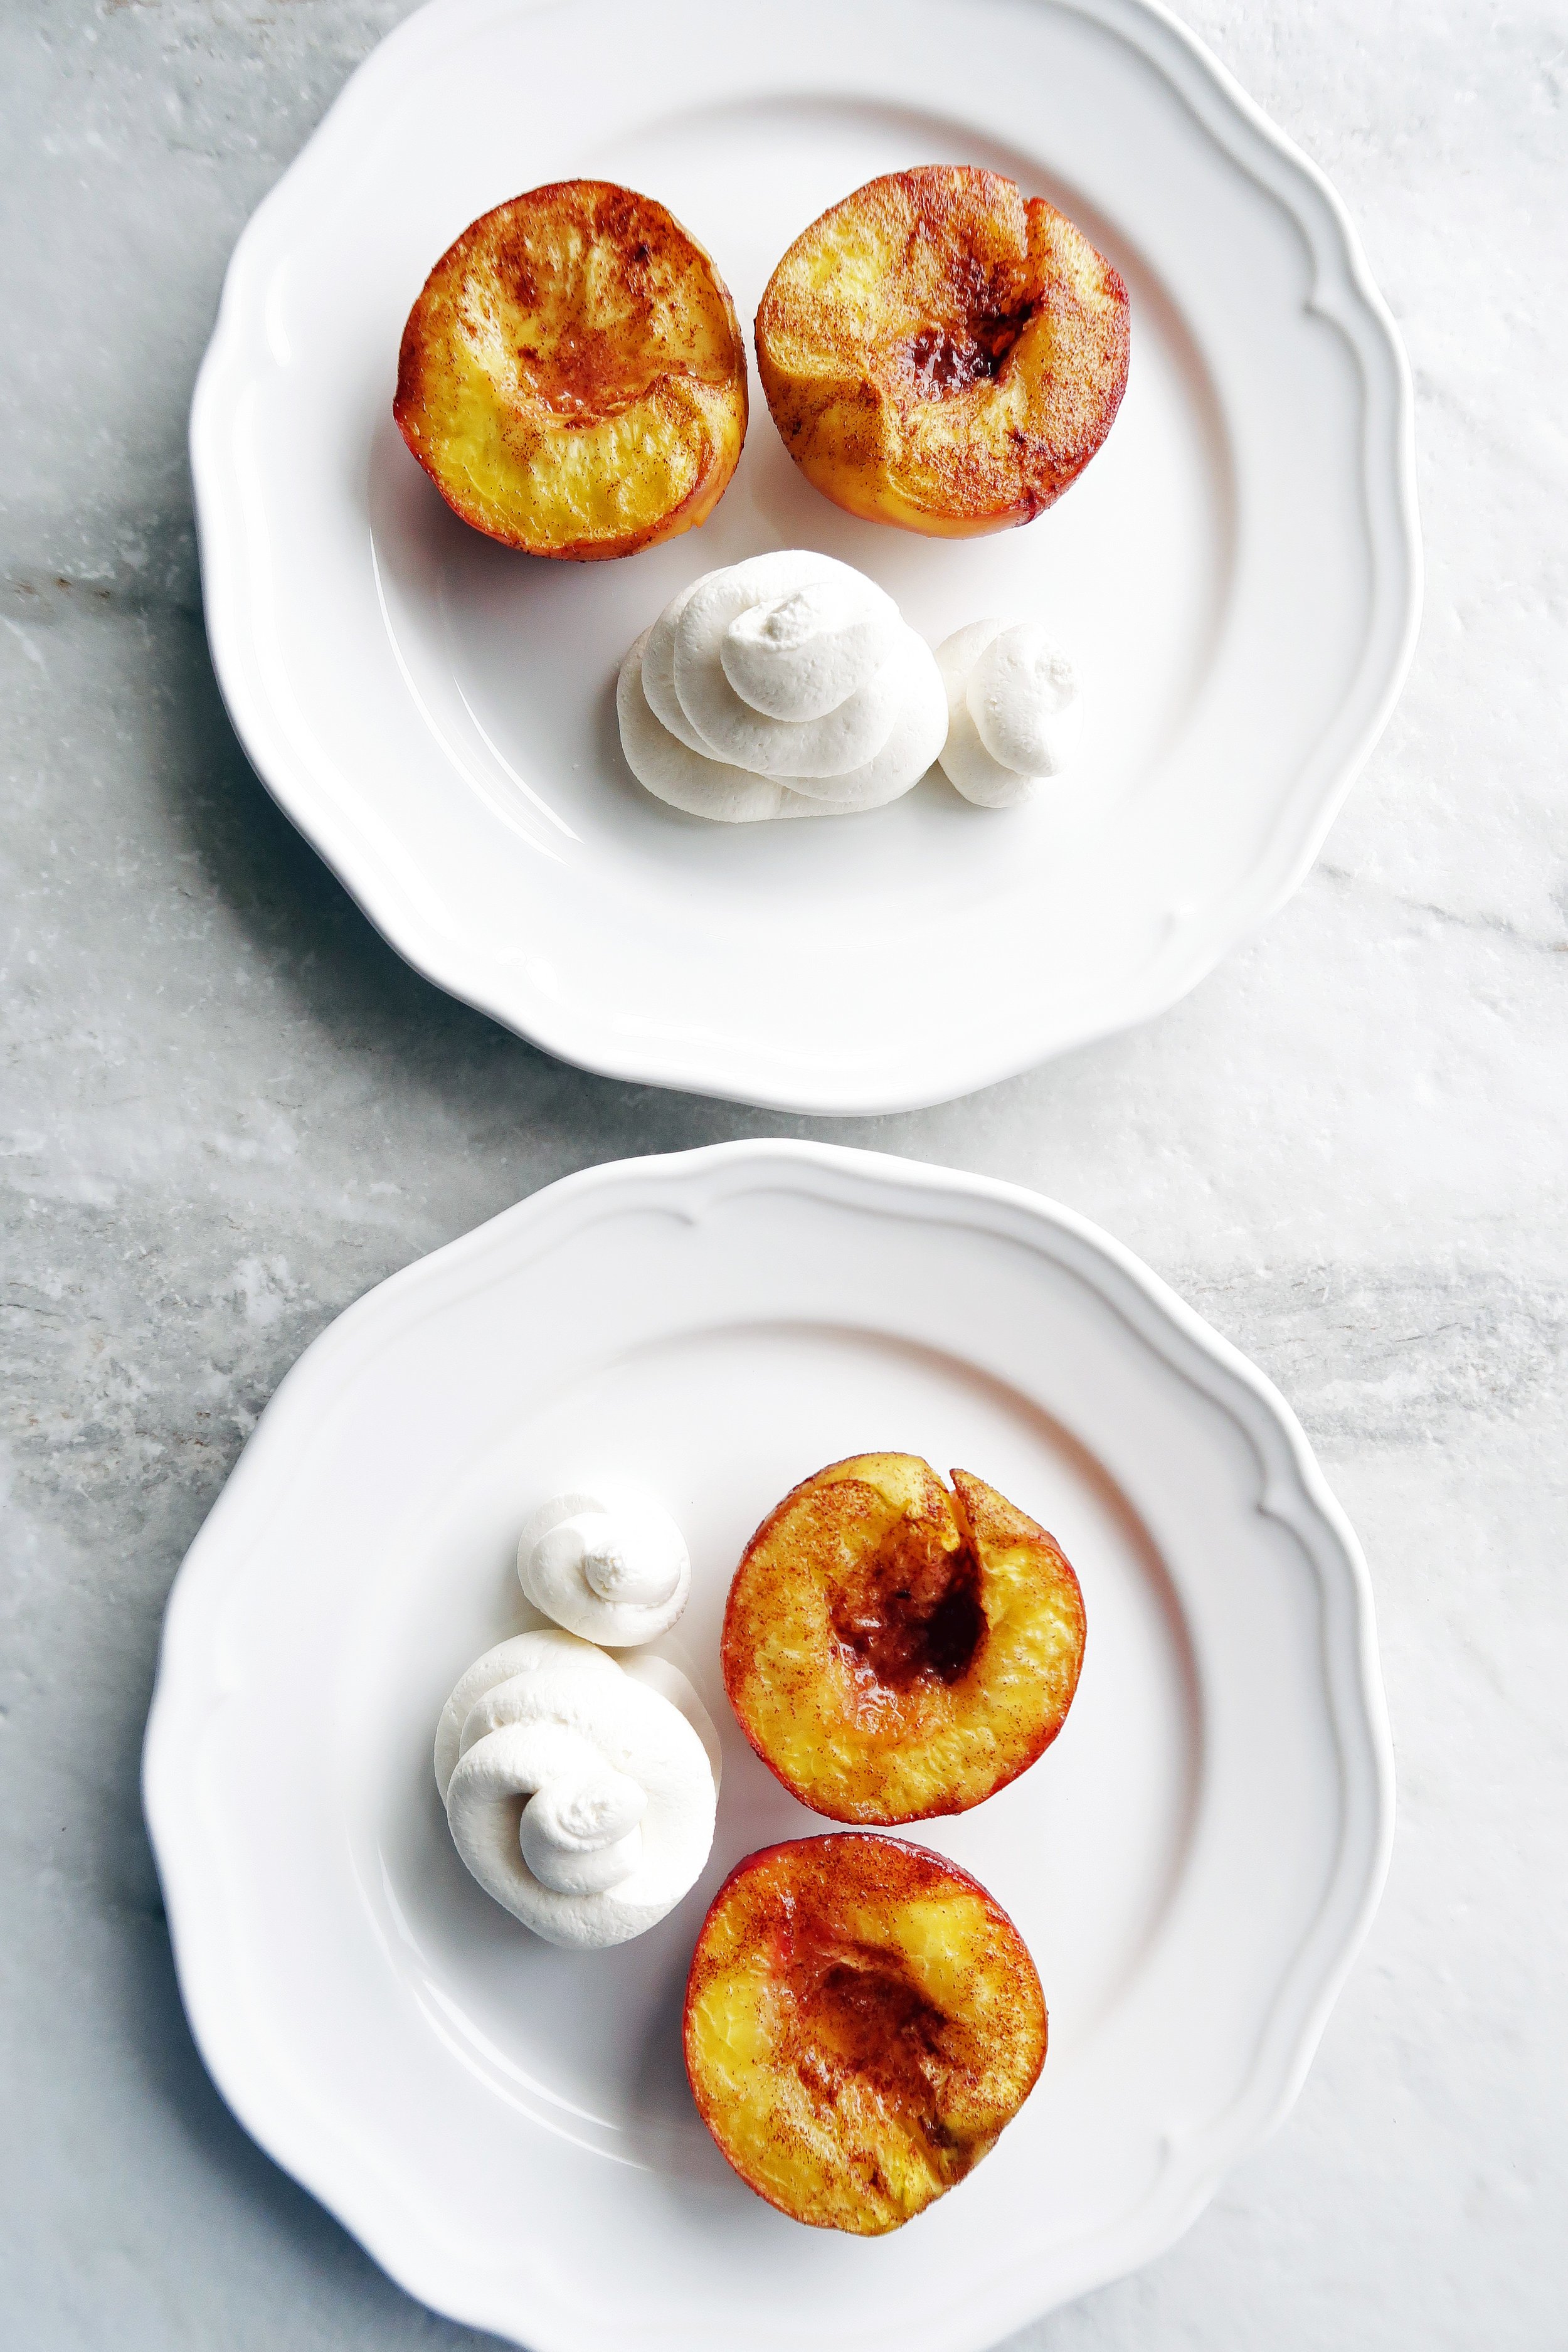 Cinnamon Roasted Peach Halves with Honey Mascarpone Whipped Cream beside the peaches on two white plates.